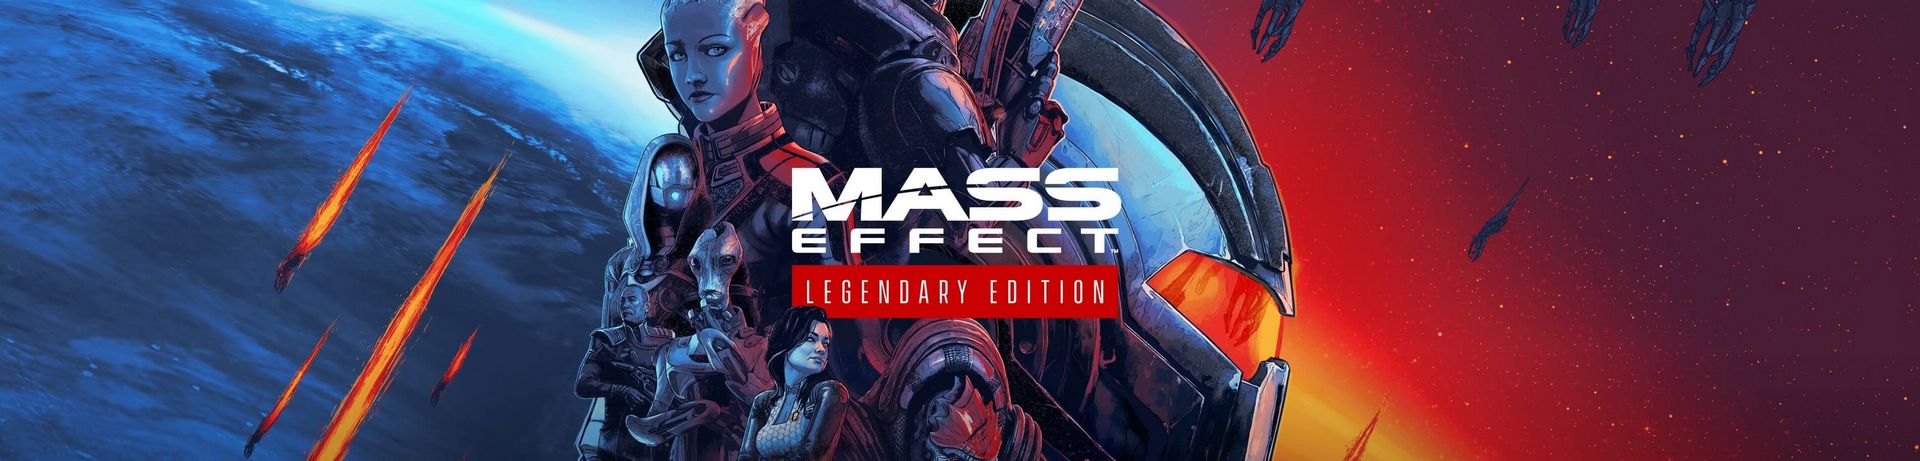 Mass Effect™ Legendary Edition - Complete Achievements Guide in Mass Effect Legendary Edition (June 2021) - Introduction